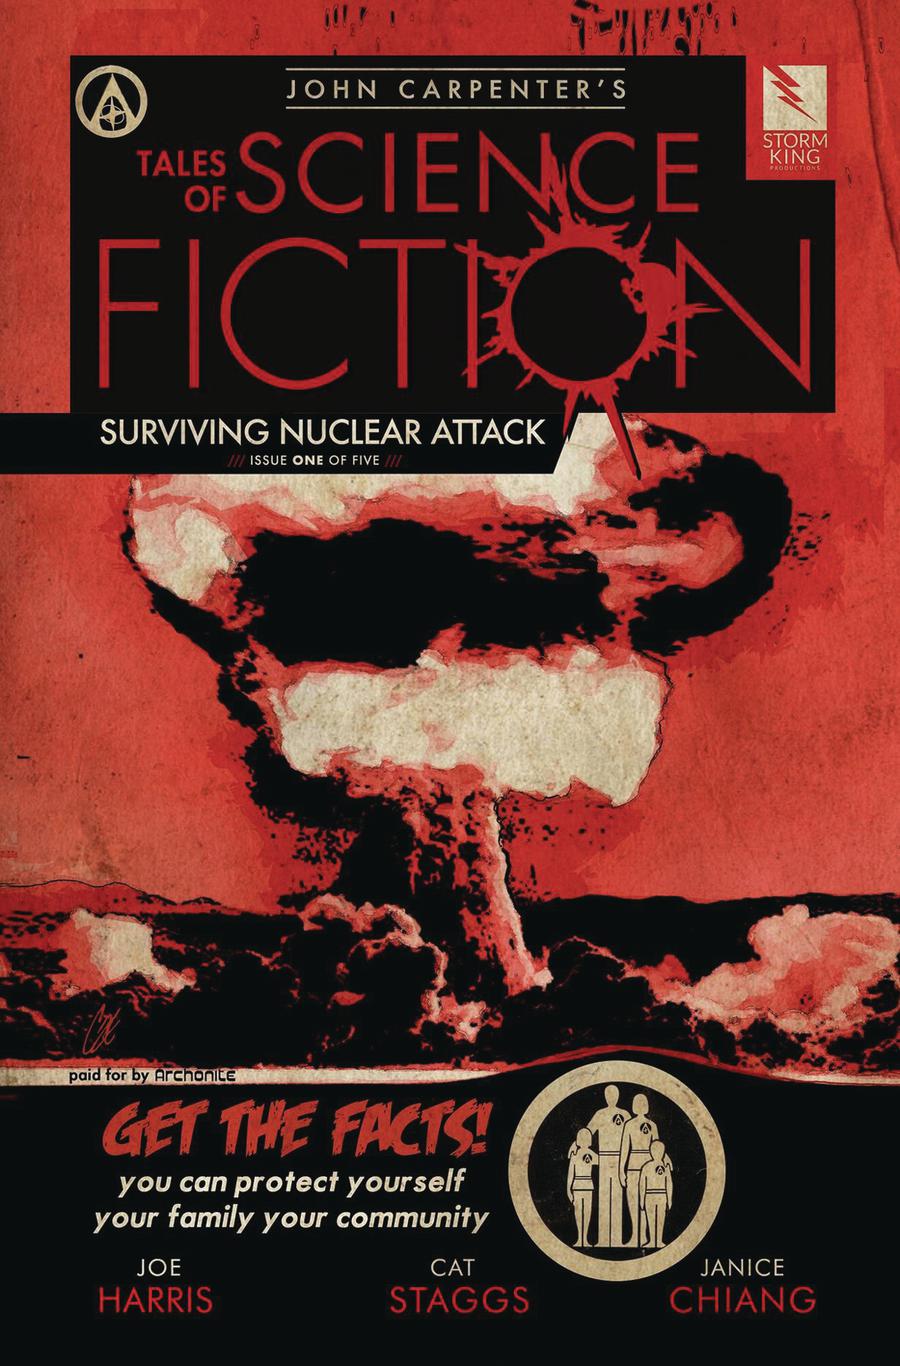 John Carpenters Tales Of Science Fiction Surviving Nuclear Attack #1